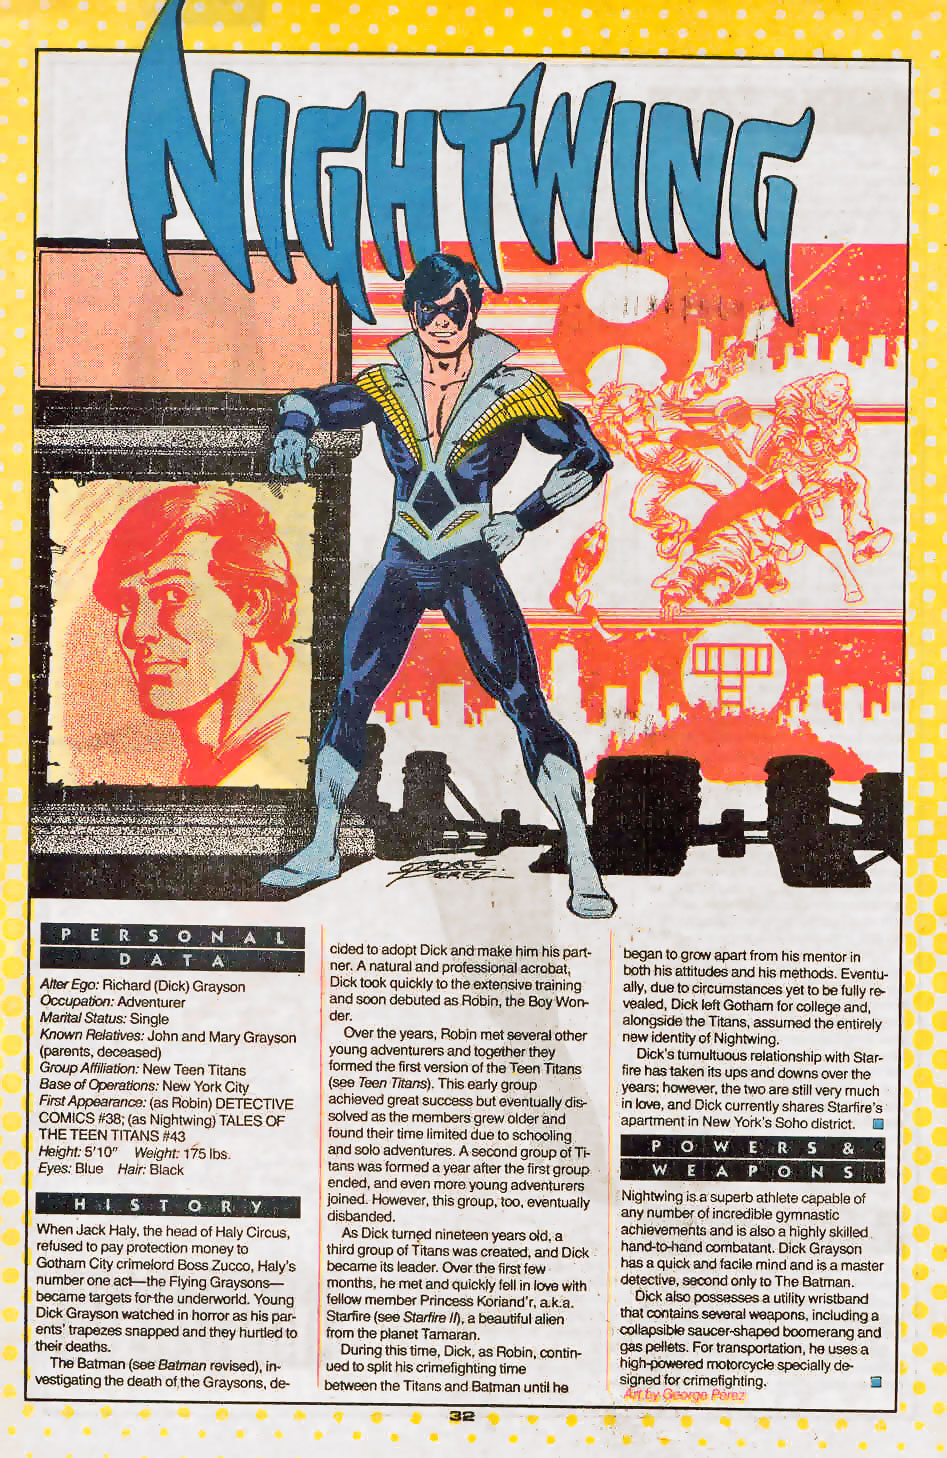 Nightwing by George Perez - Who’s Who: Update ‘88, vol. 2